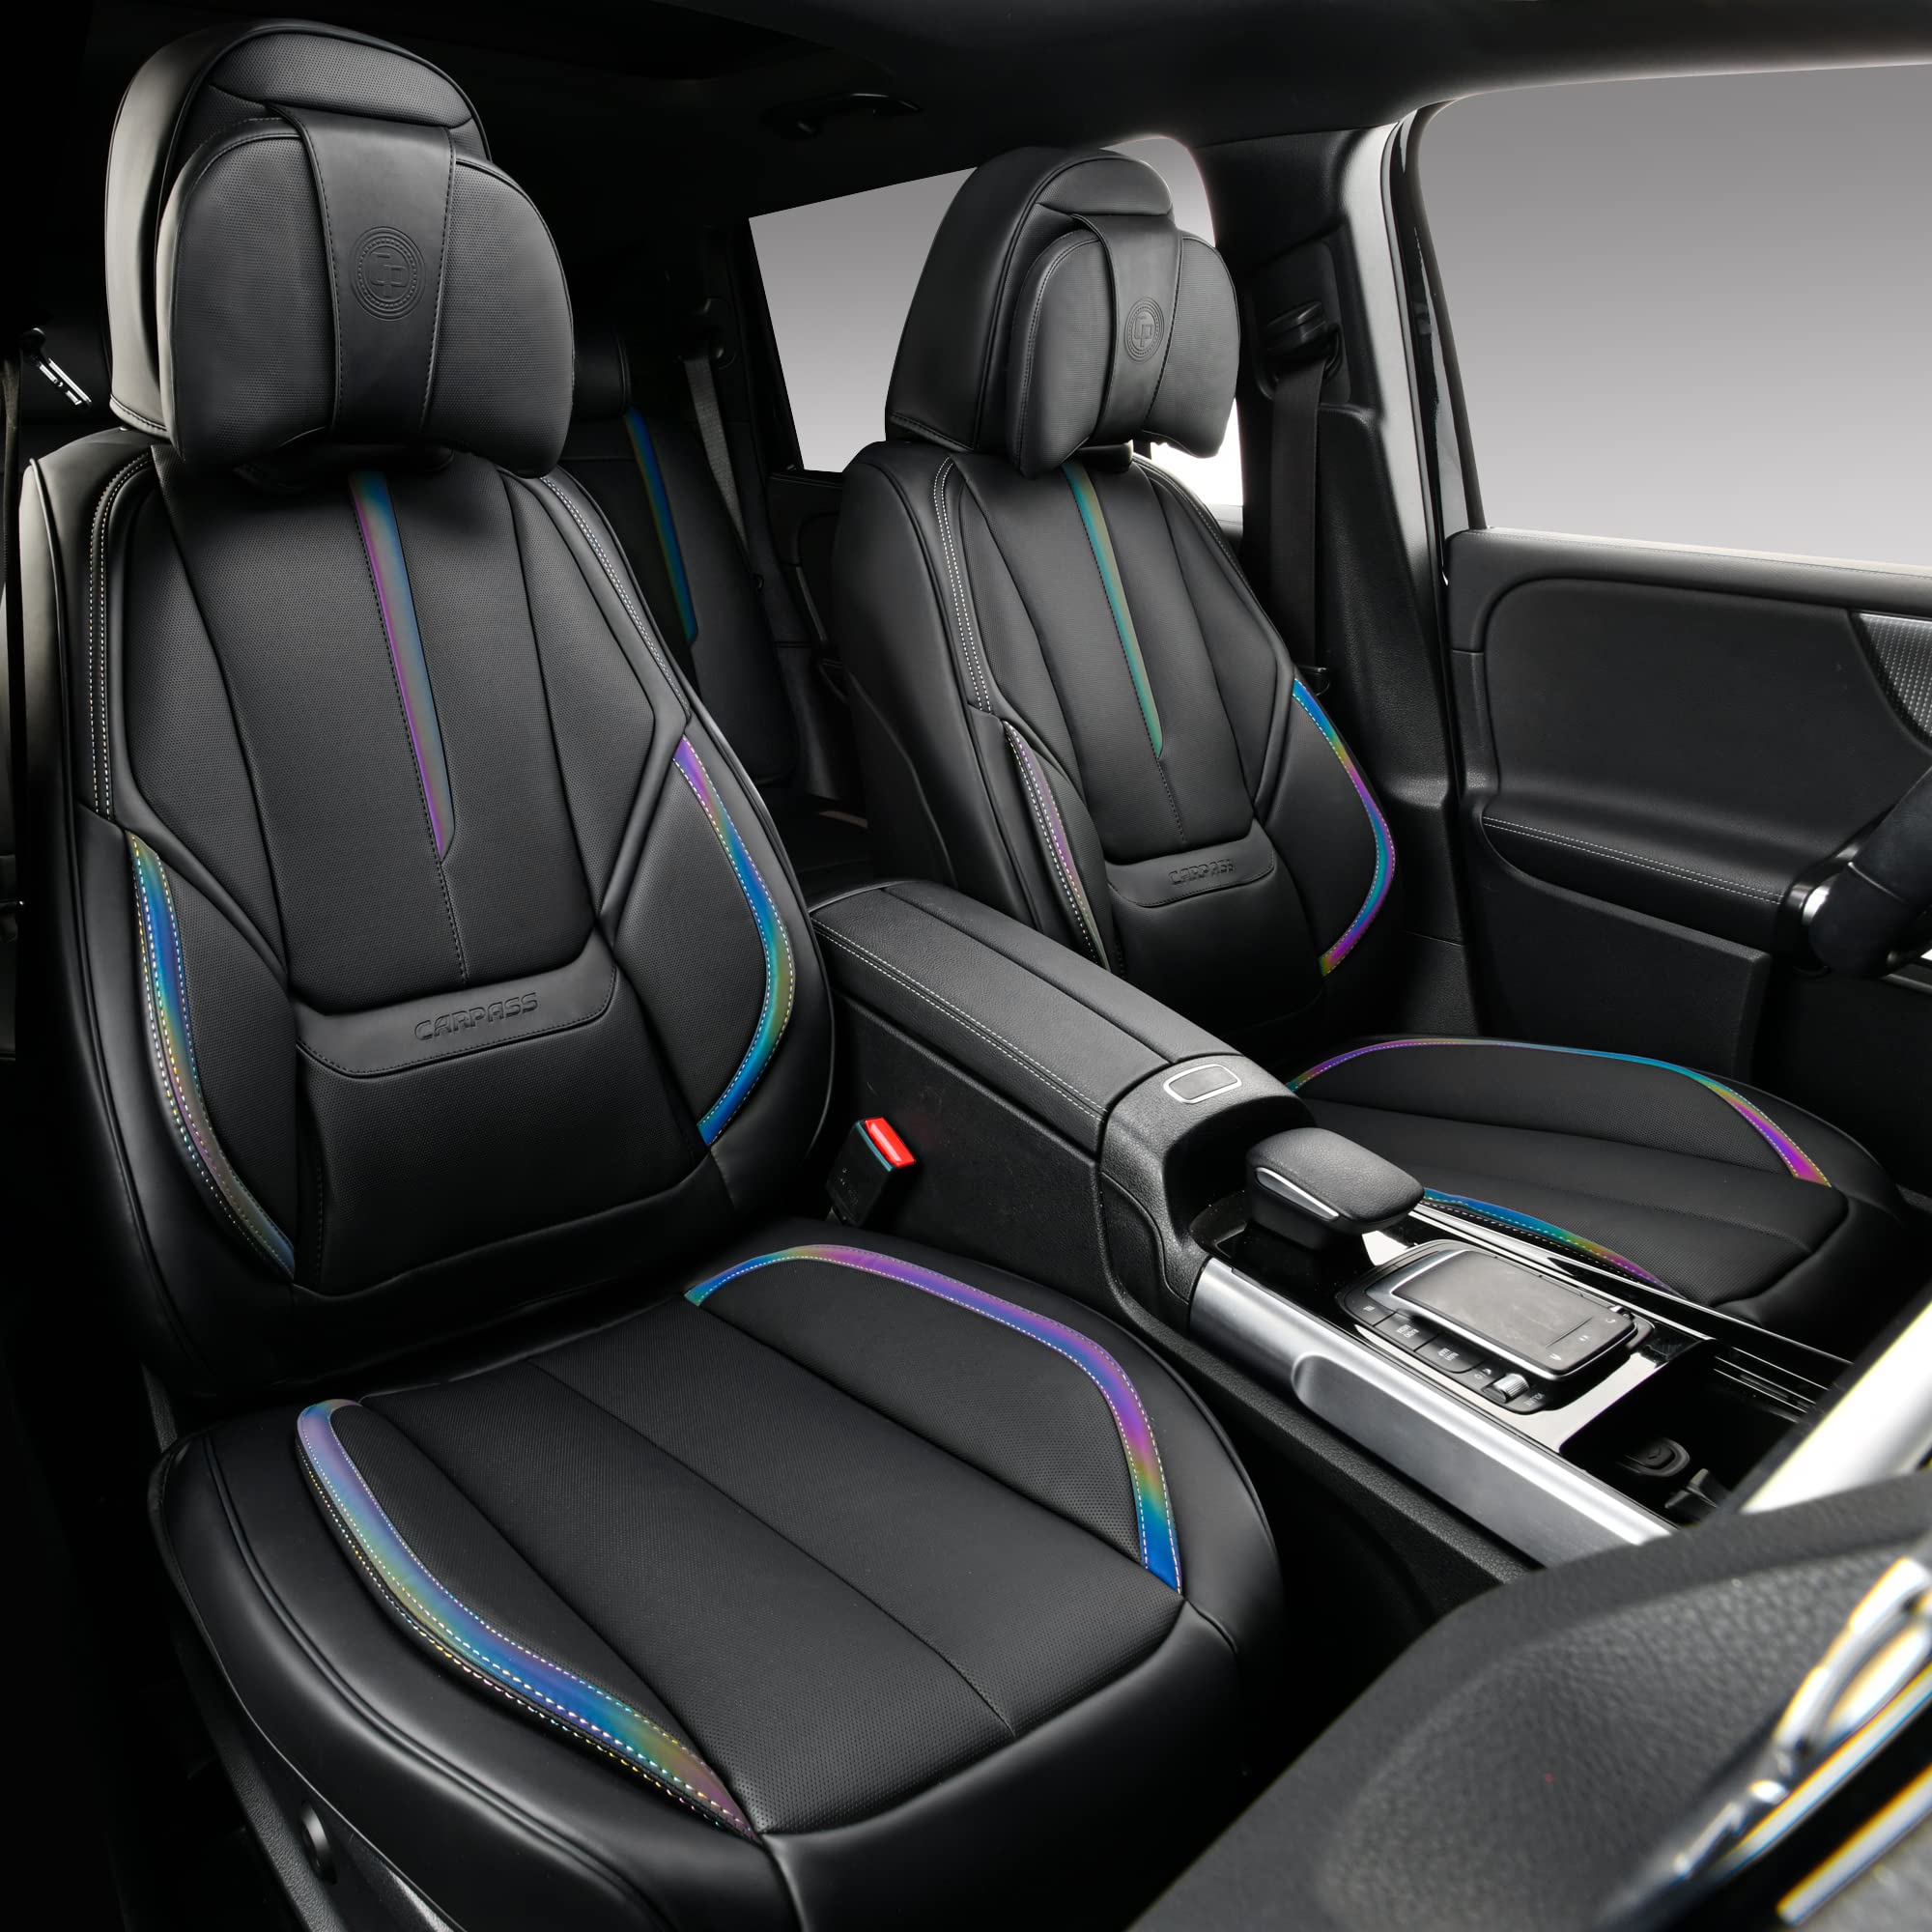 Chameleon Lumbar Support Nappa Leather Seat Covers Full Set Coverage Waterproof & Breathable Luxury Cushioned